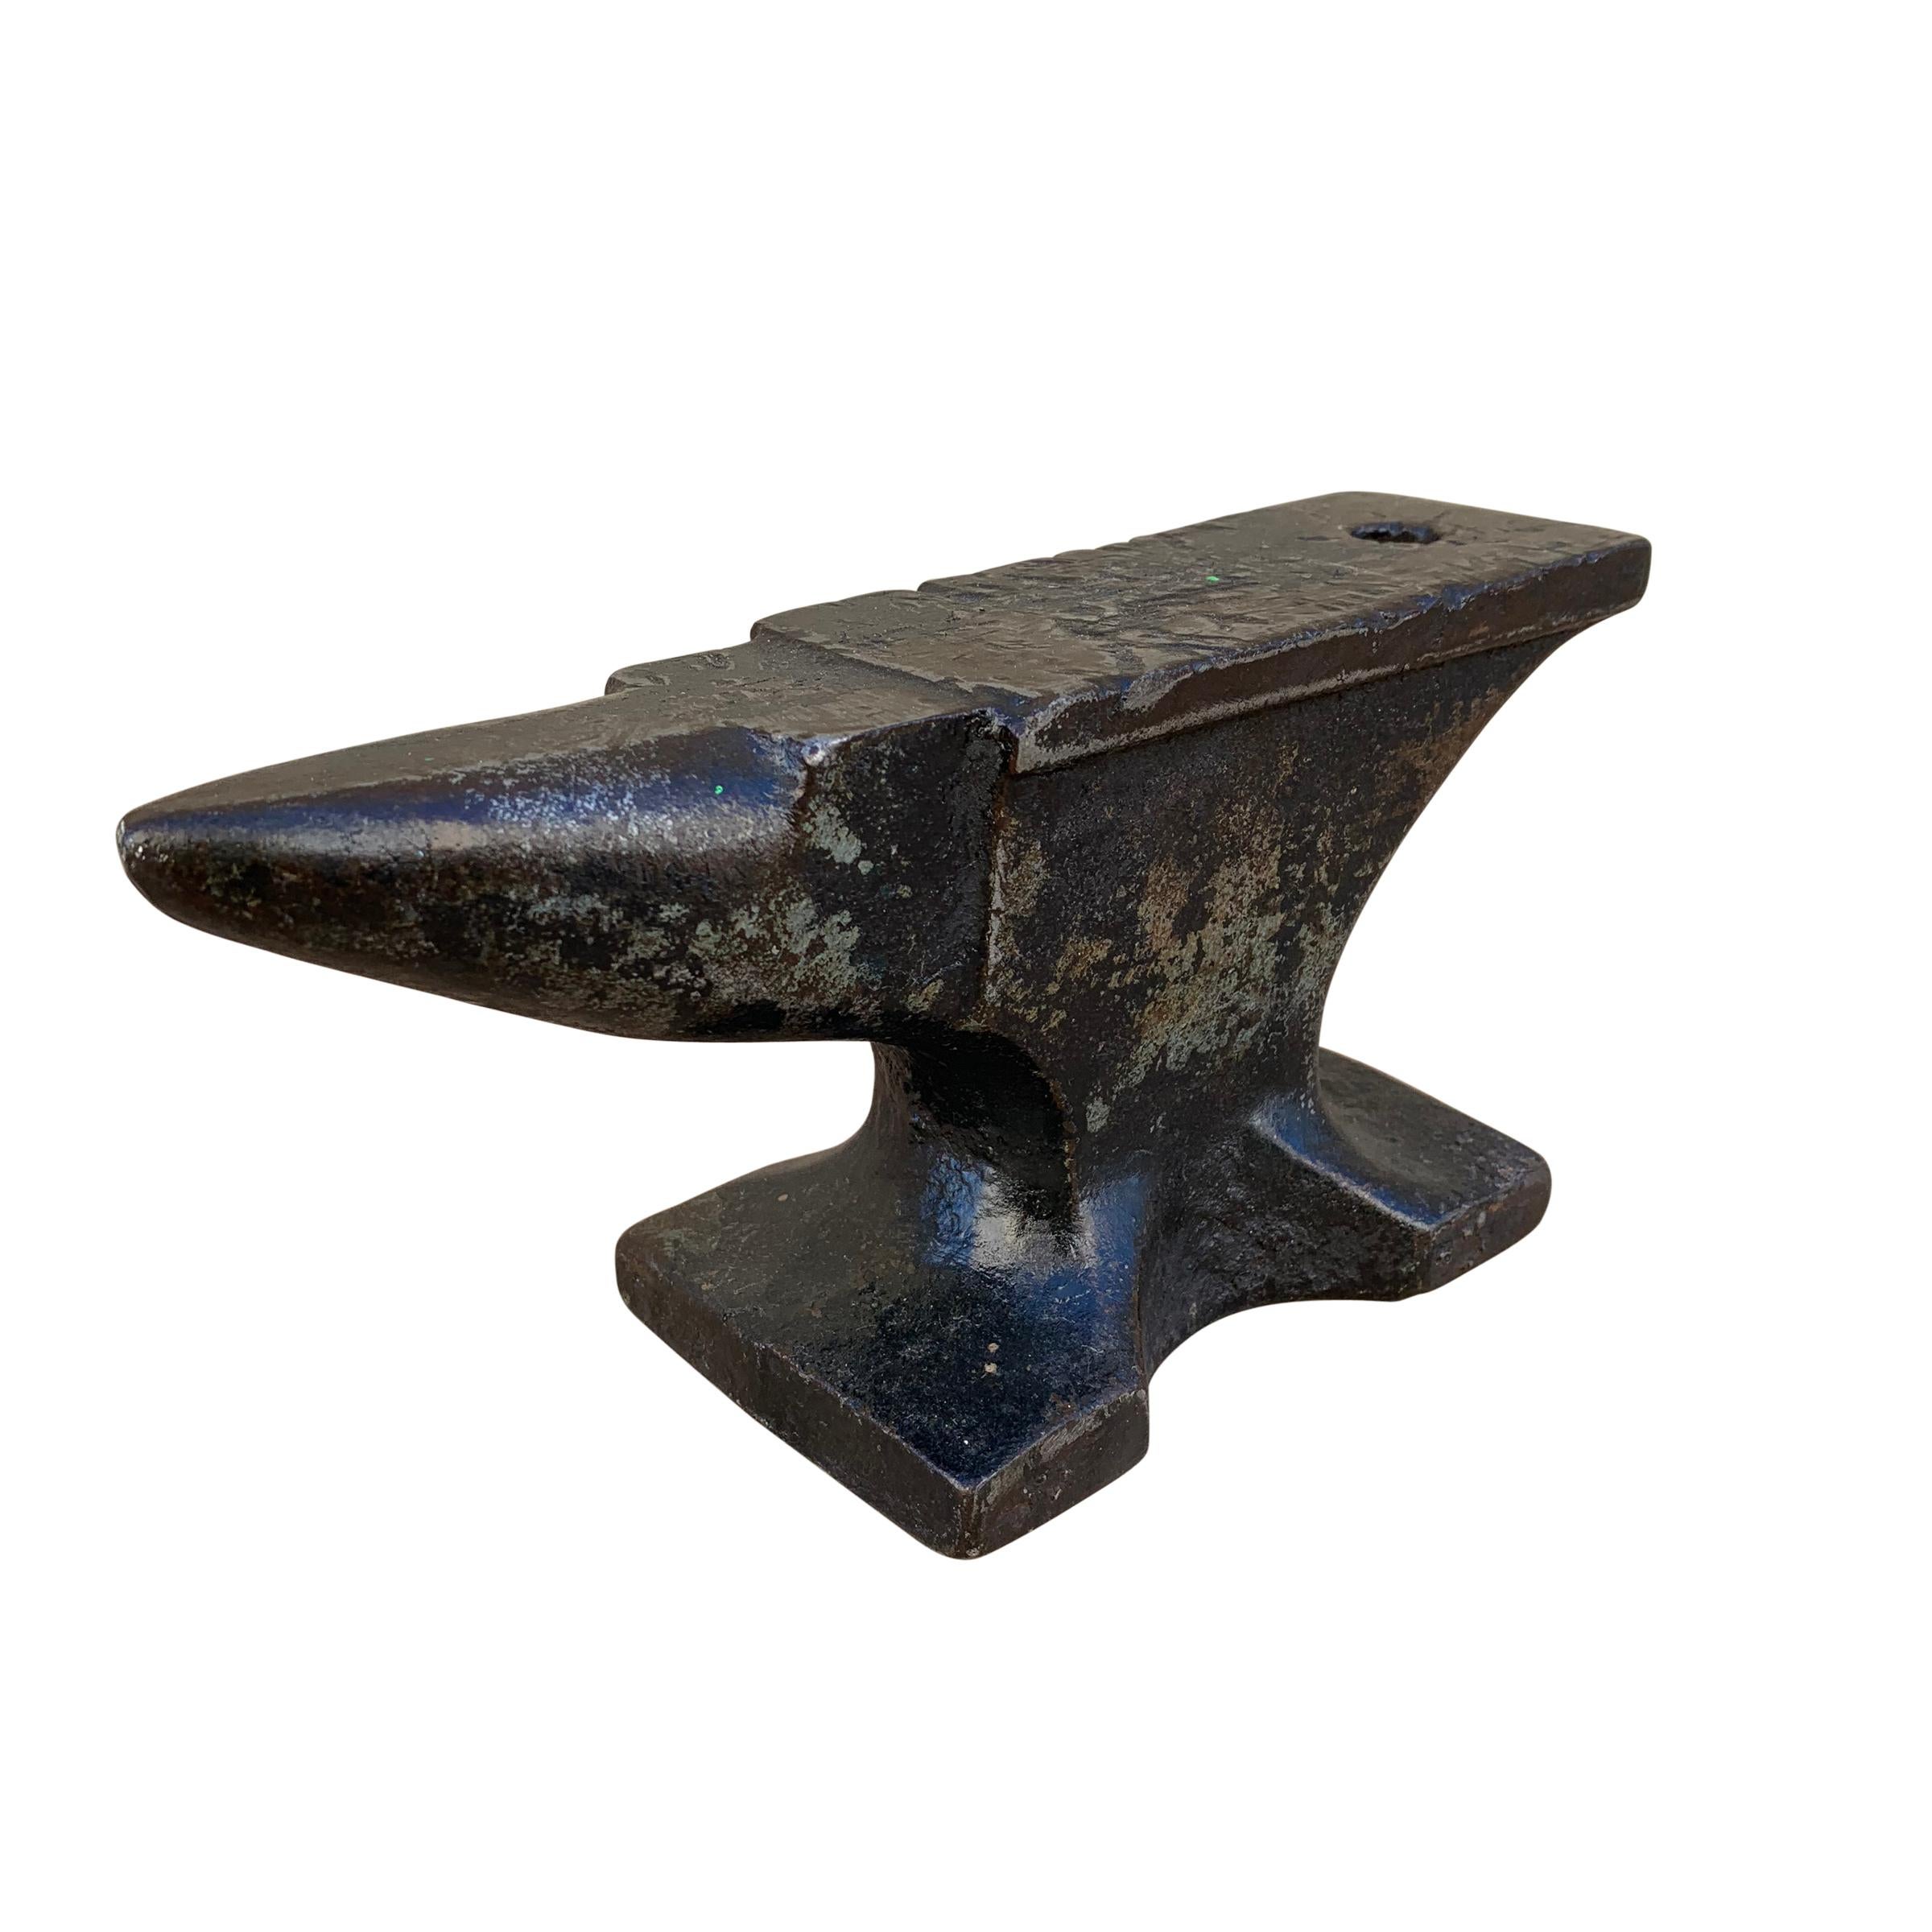 A wonderful miniature early 20th century American iron bench anvil with a beautiful patina, and signs of decades of use. Makes a great sculpture or paperweight.